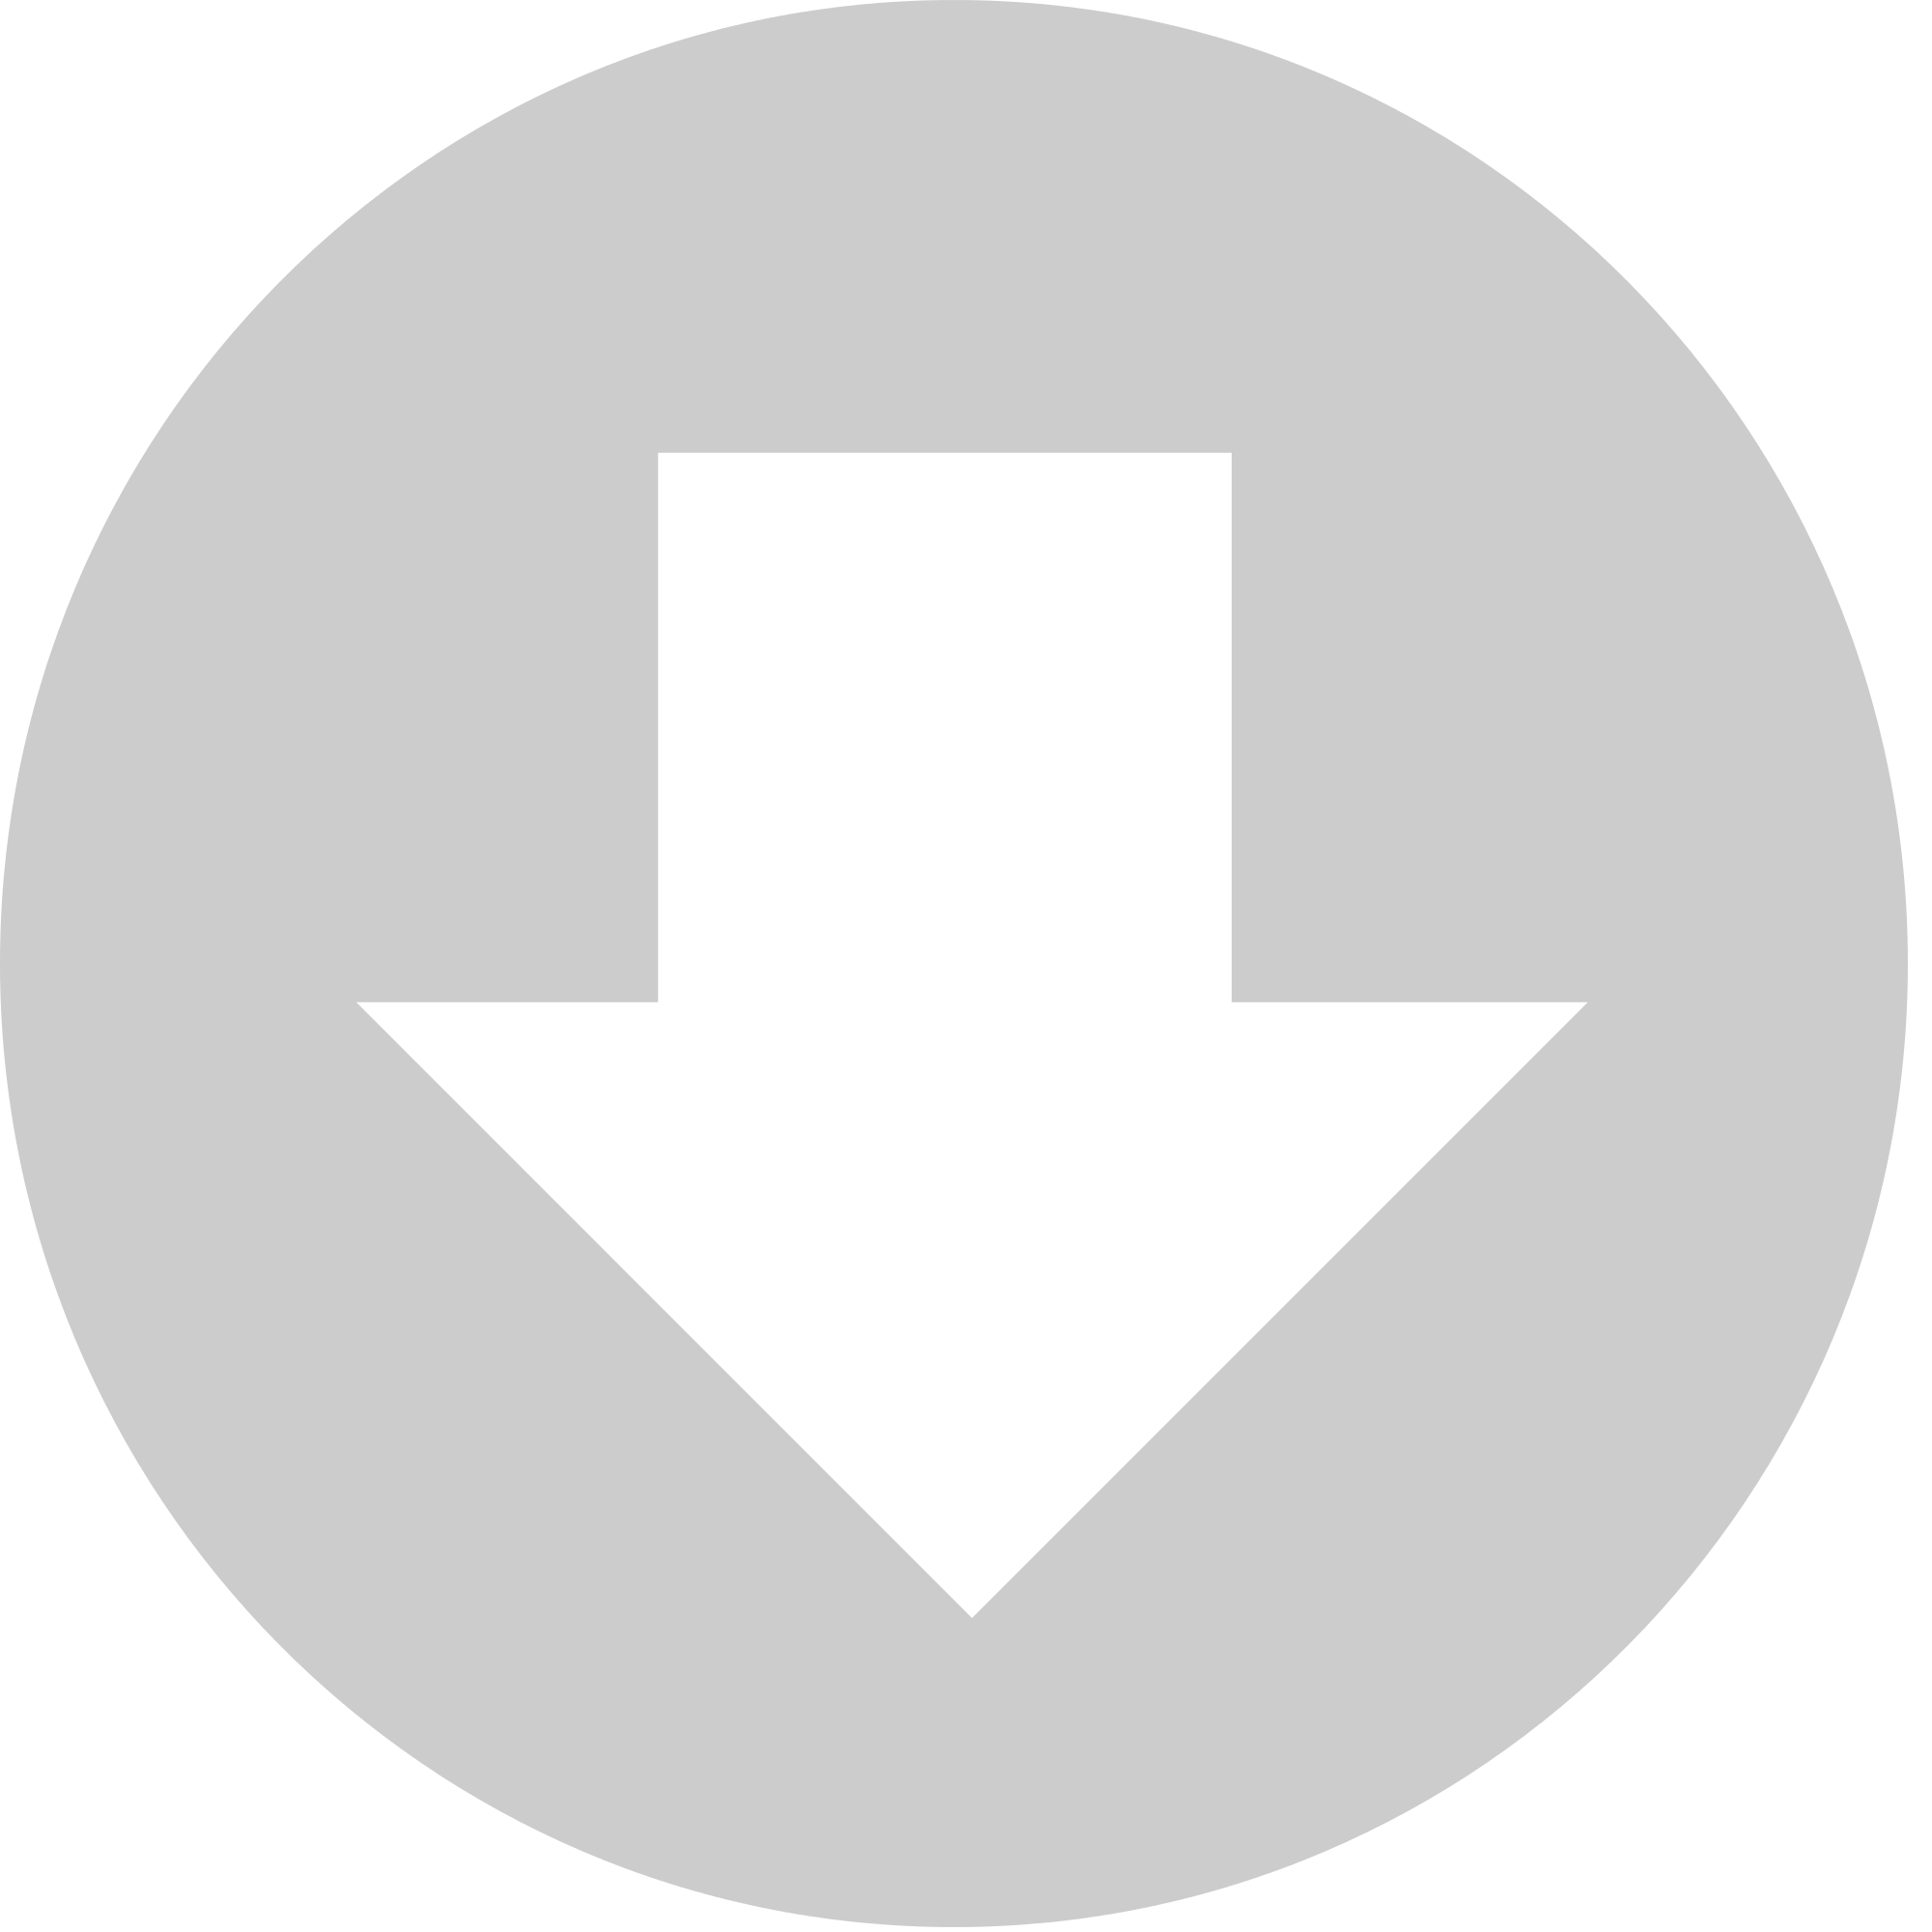 File:Circled gray arrow pointing down.svg - Wikimedia Commons